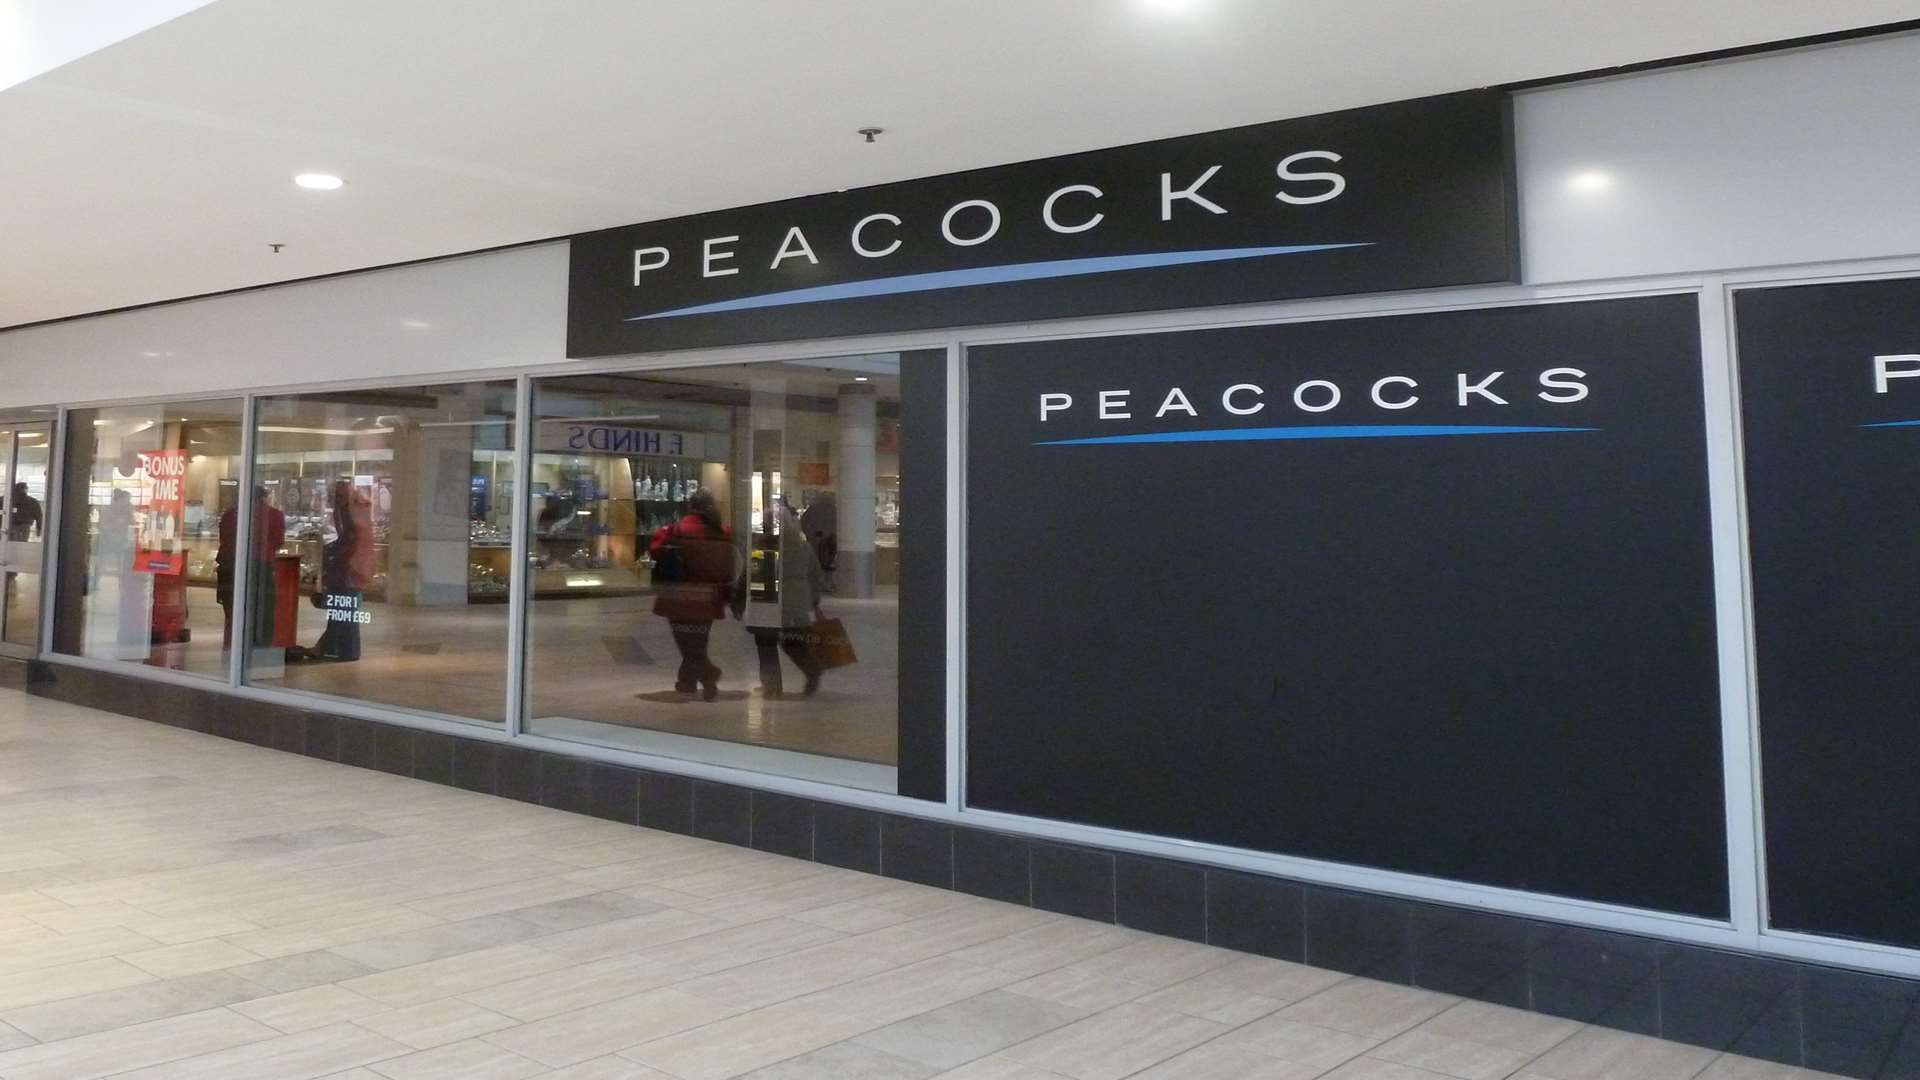 Peacocks is moving into Dockside Outlet Centre